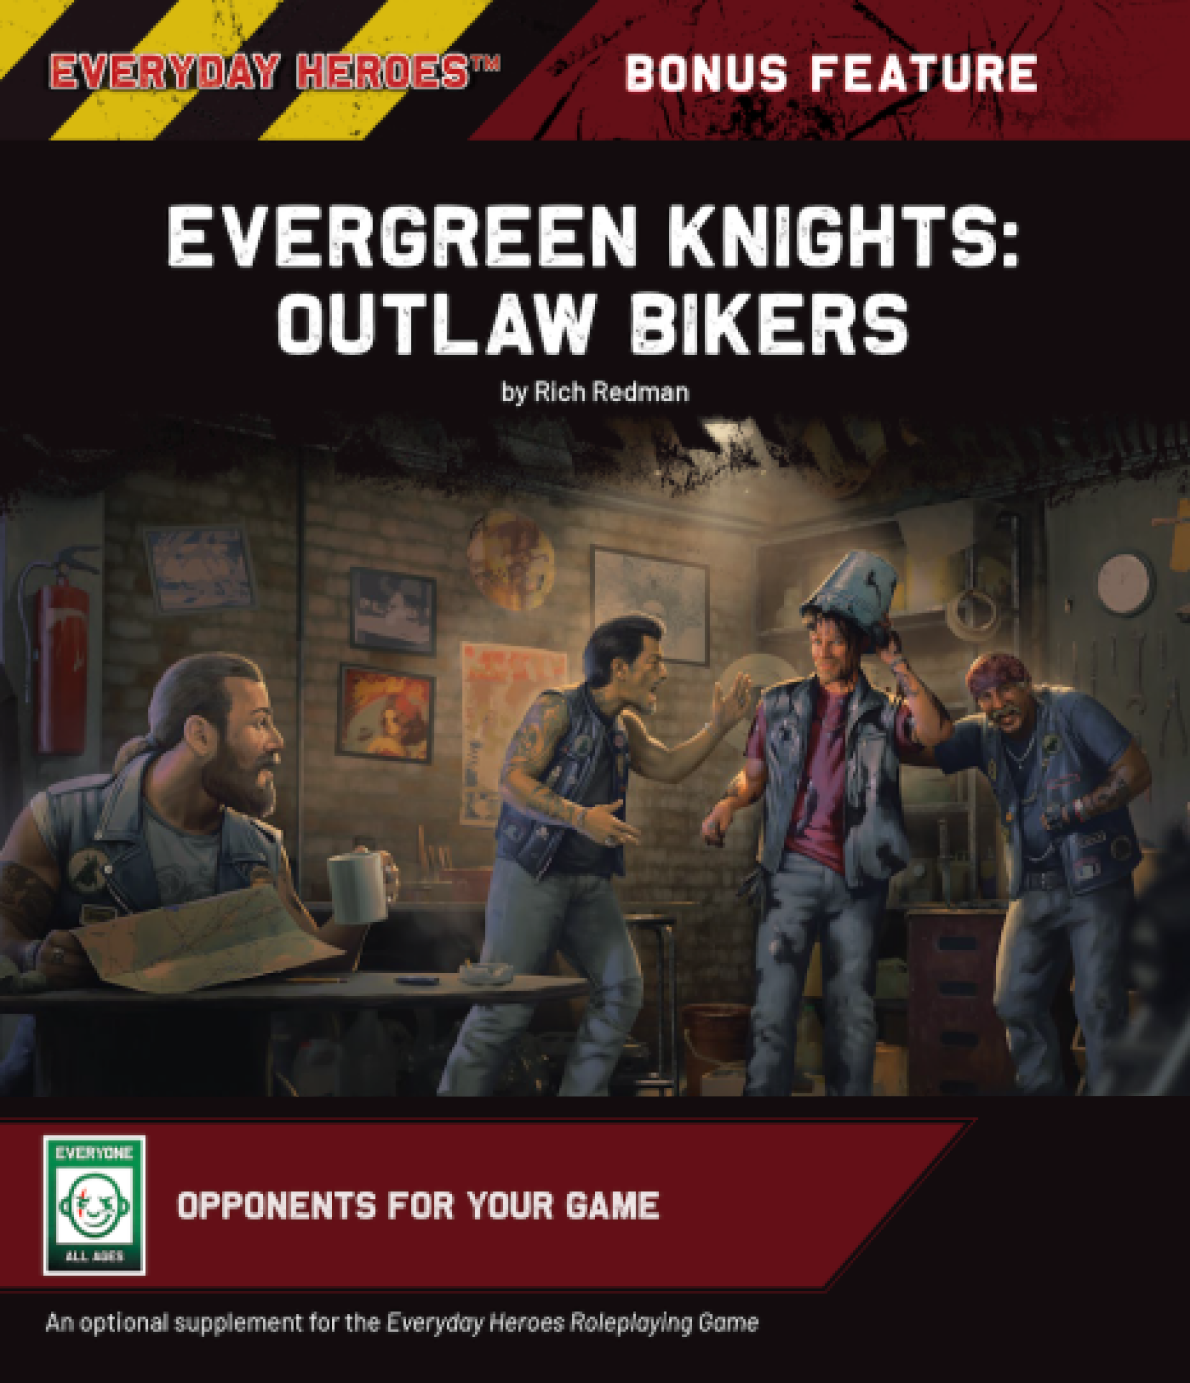 Evergreen Knights: Outlaw Bikers